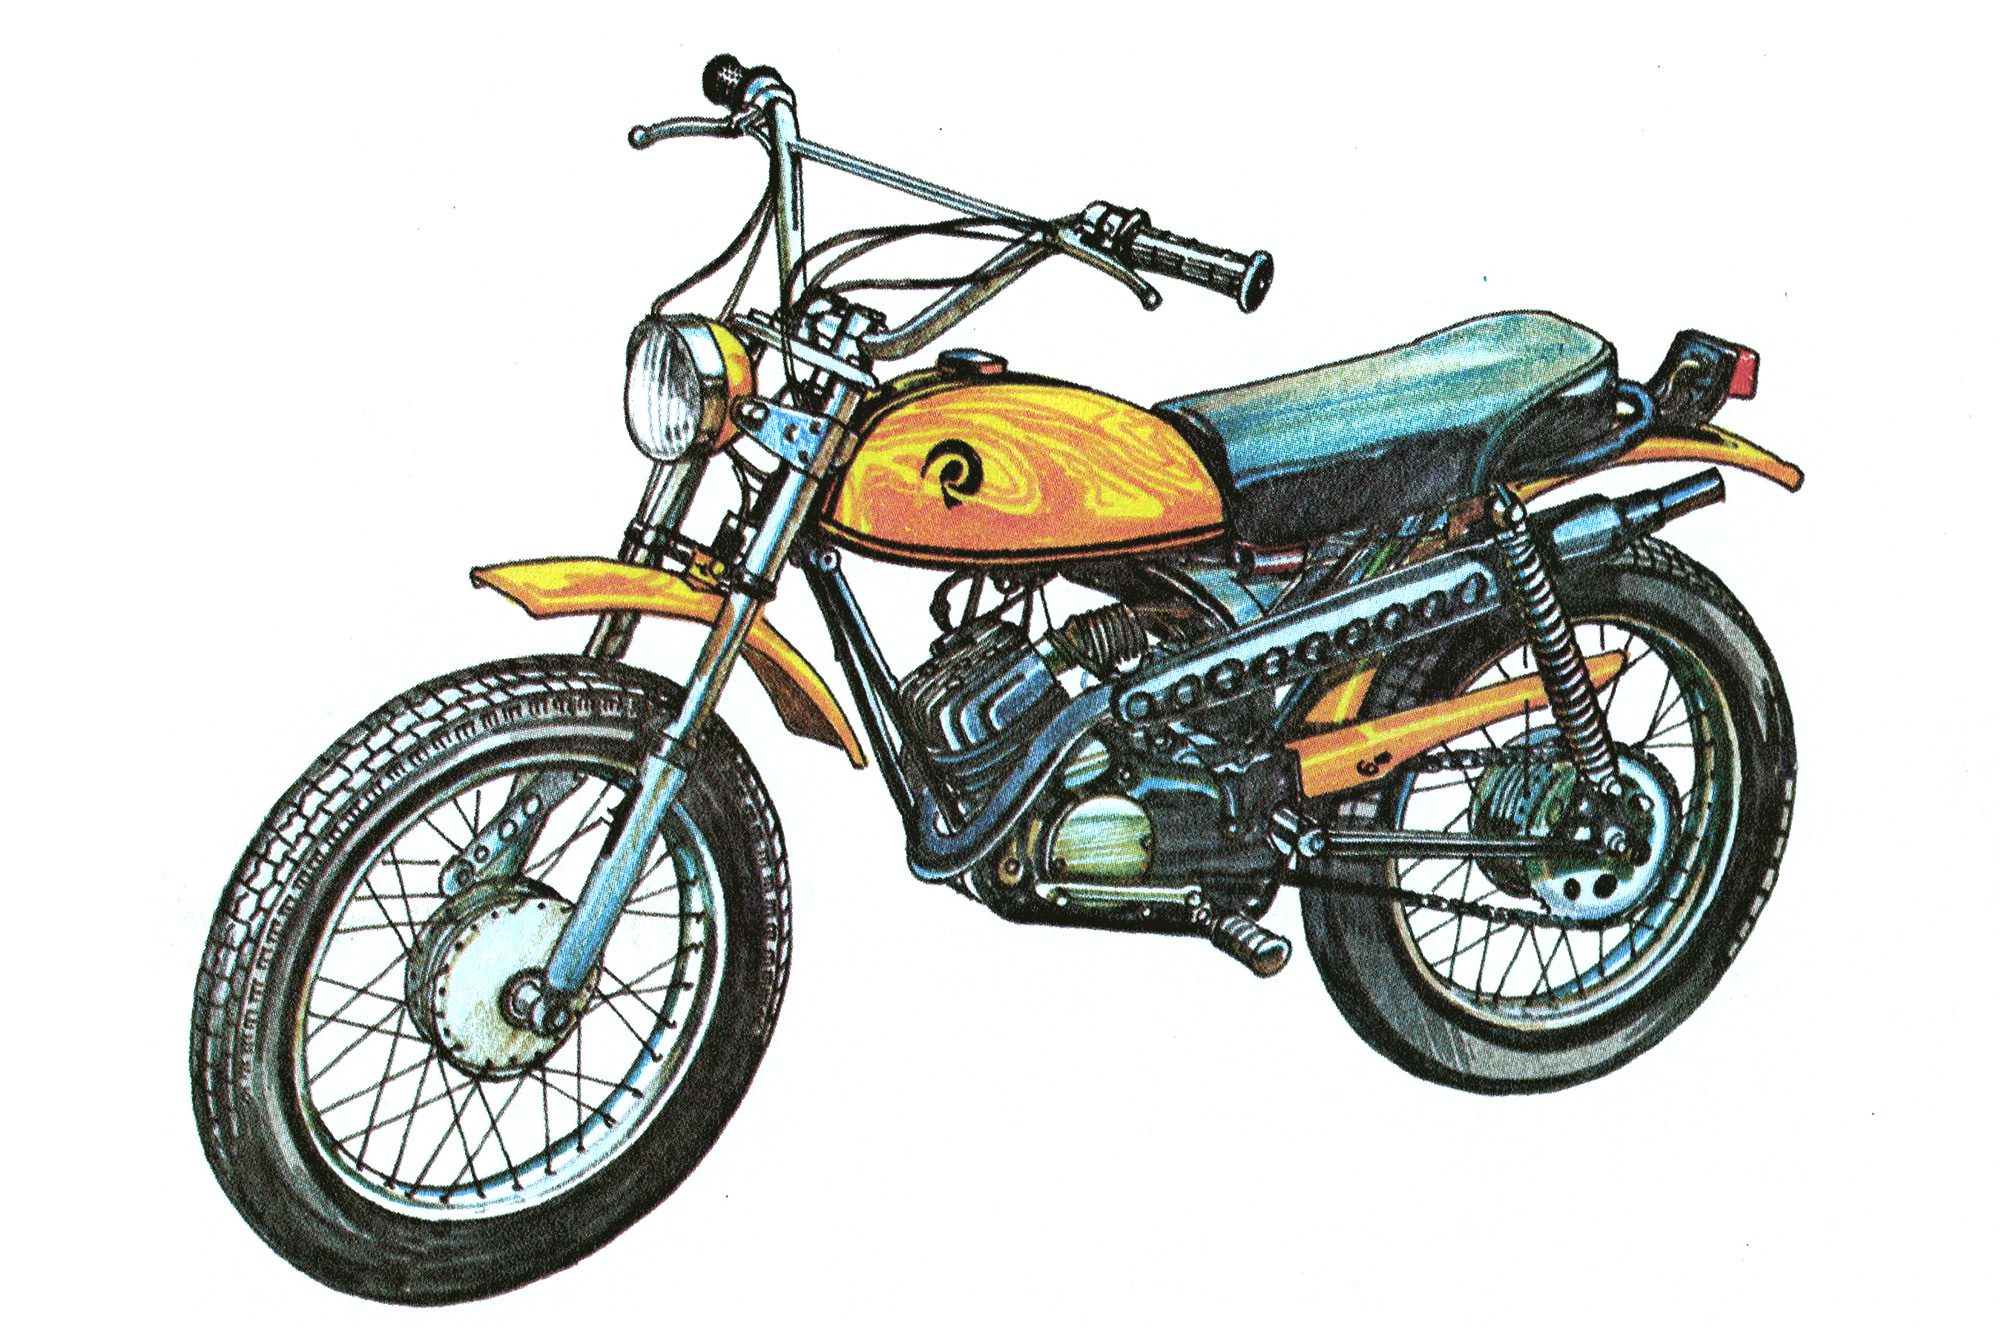 An illustration of a 1970s minibike